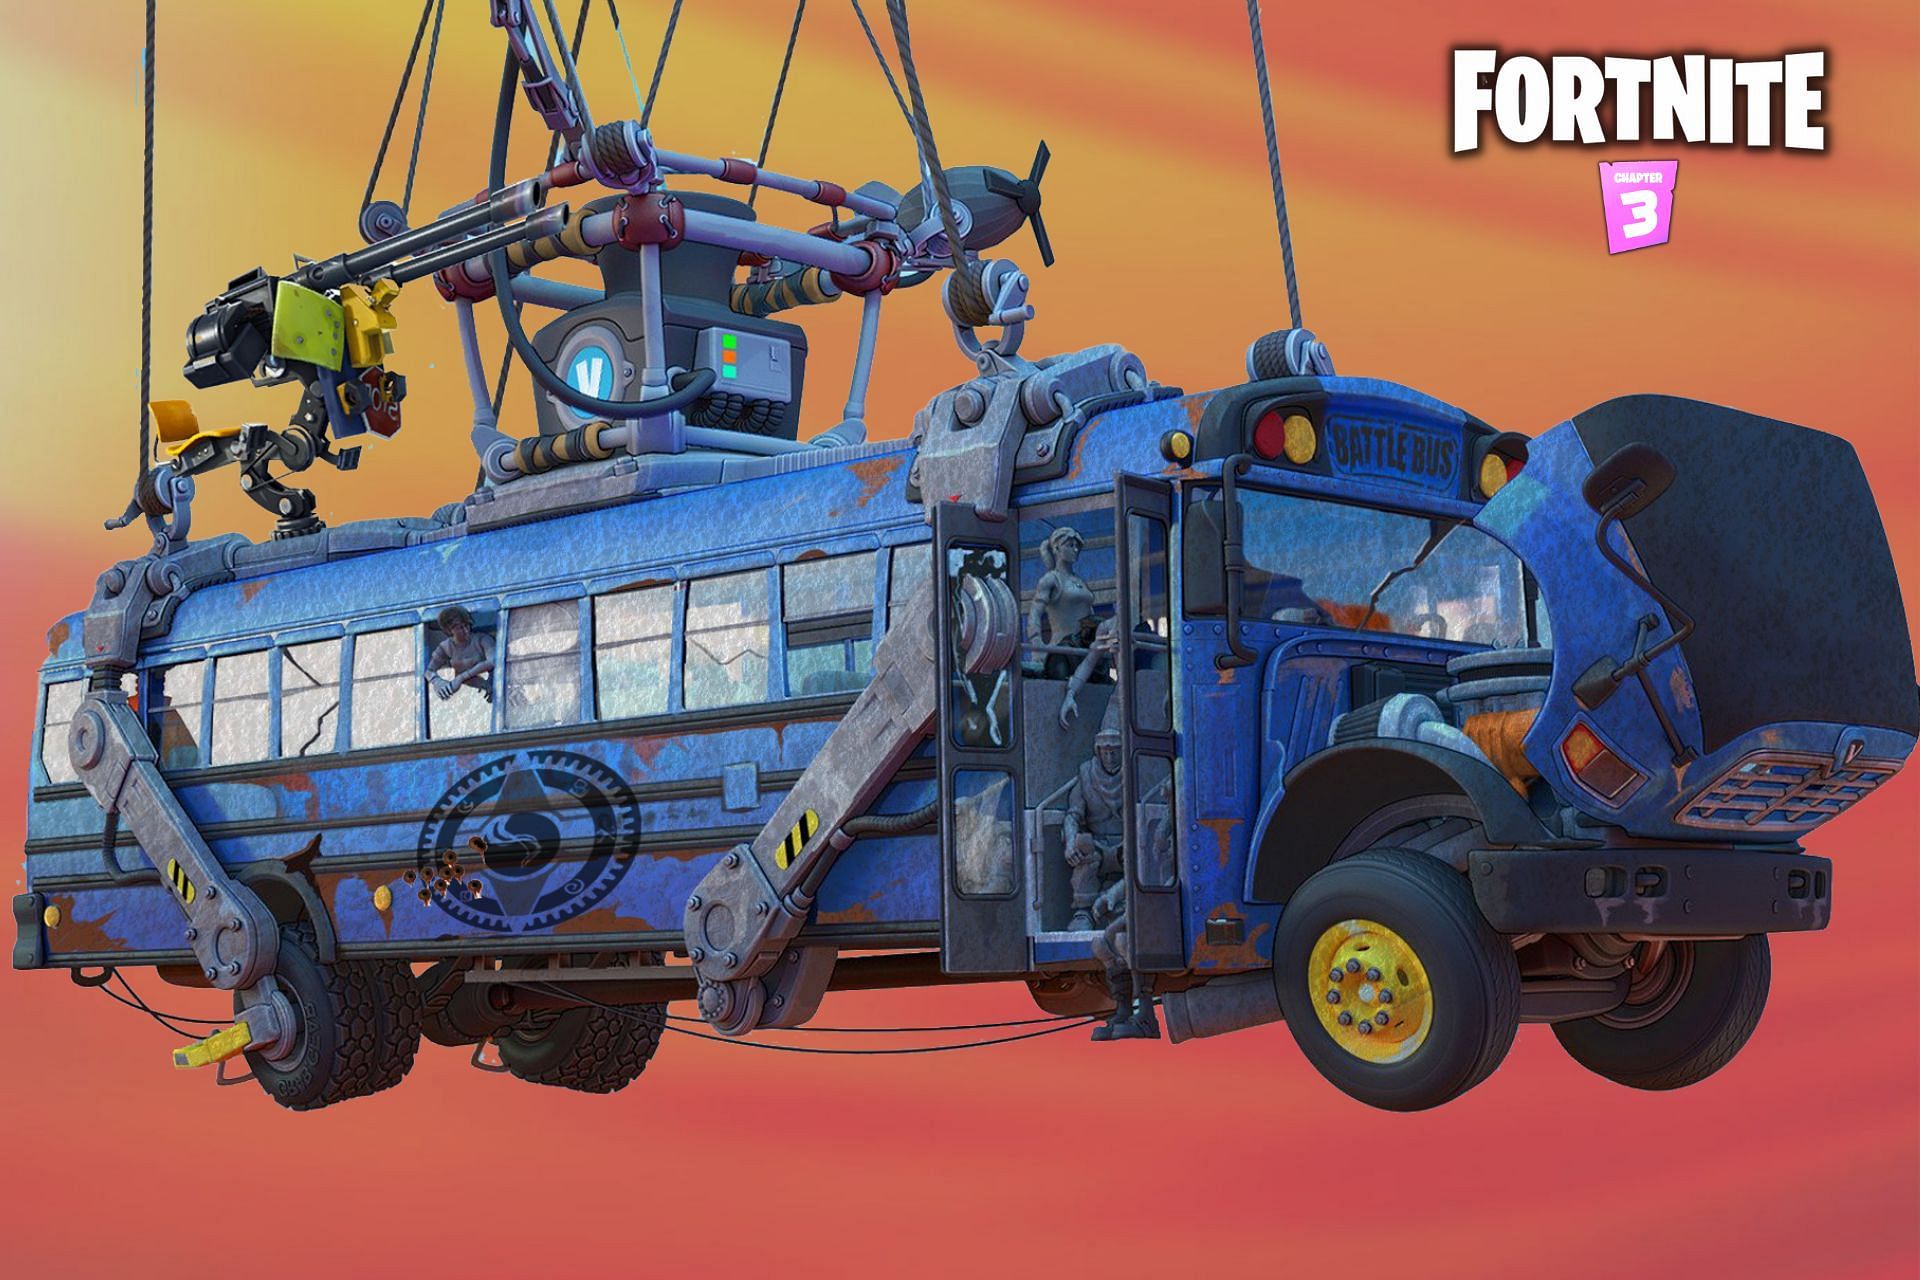 The Imagined Order are going to dominate the skies in Fortnite with their very own Battle Bus (Image via Sportskeeda)